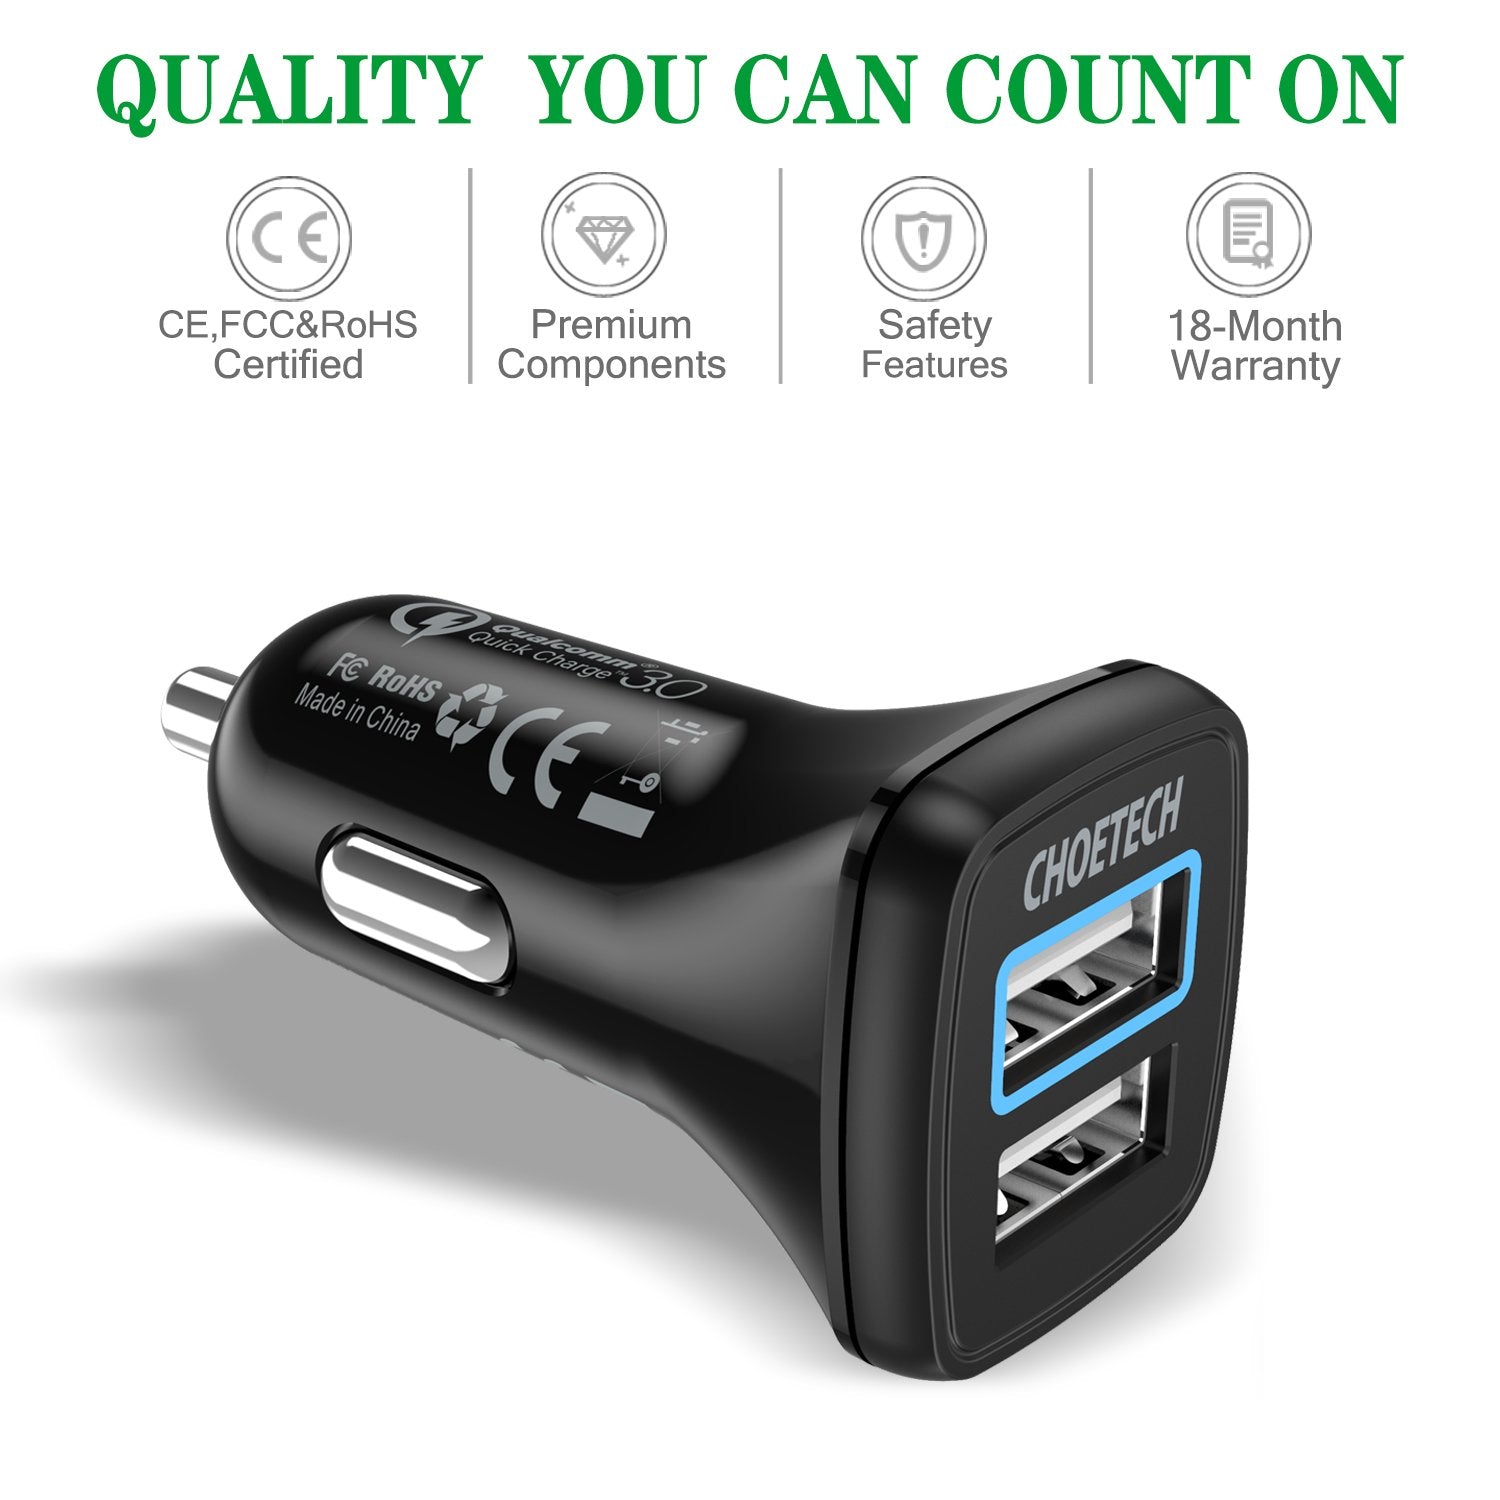 C0051 Choetech QC 30W Car Charger With USB Cable